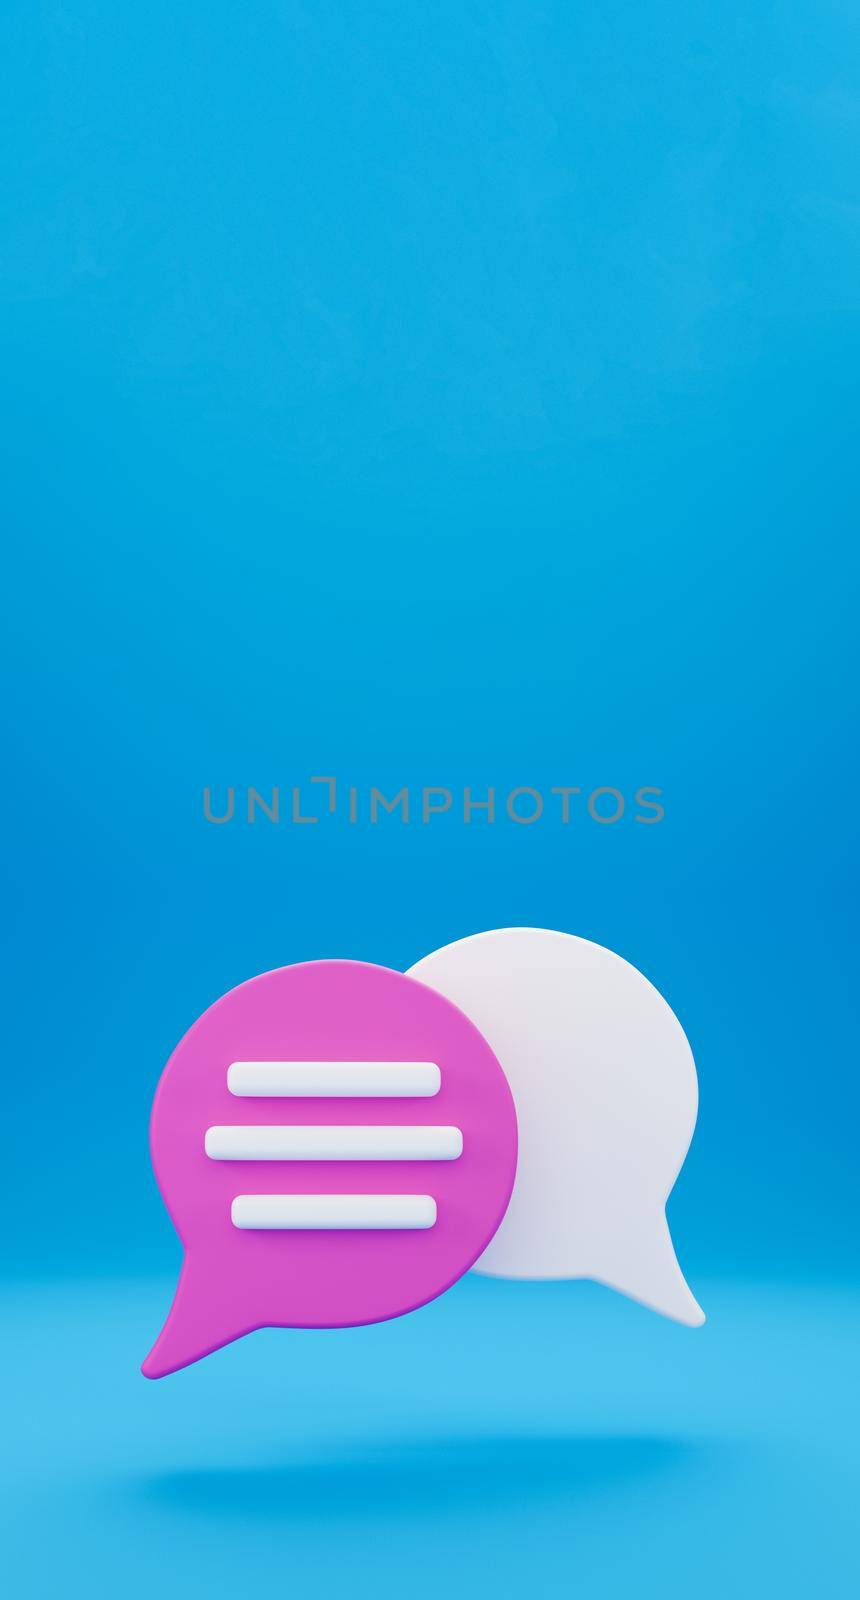 3d Minimal chat conversation concept. Speech bubble chat icon isolated on blue vertical background. Message creative social media chatting concept Communication or comment chat symbol. 3D render